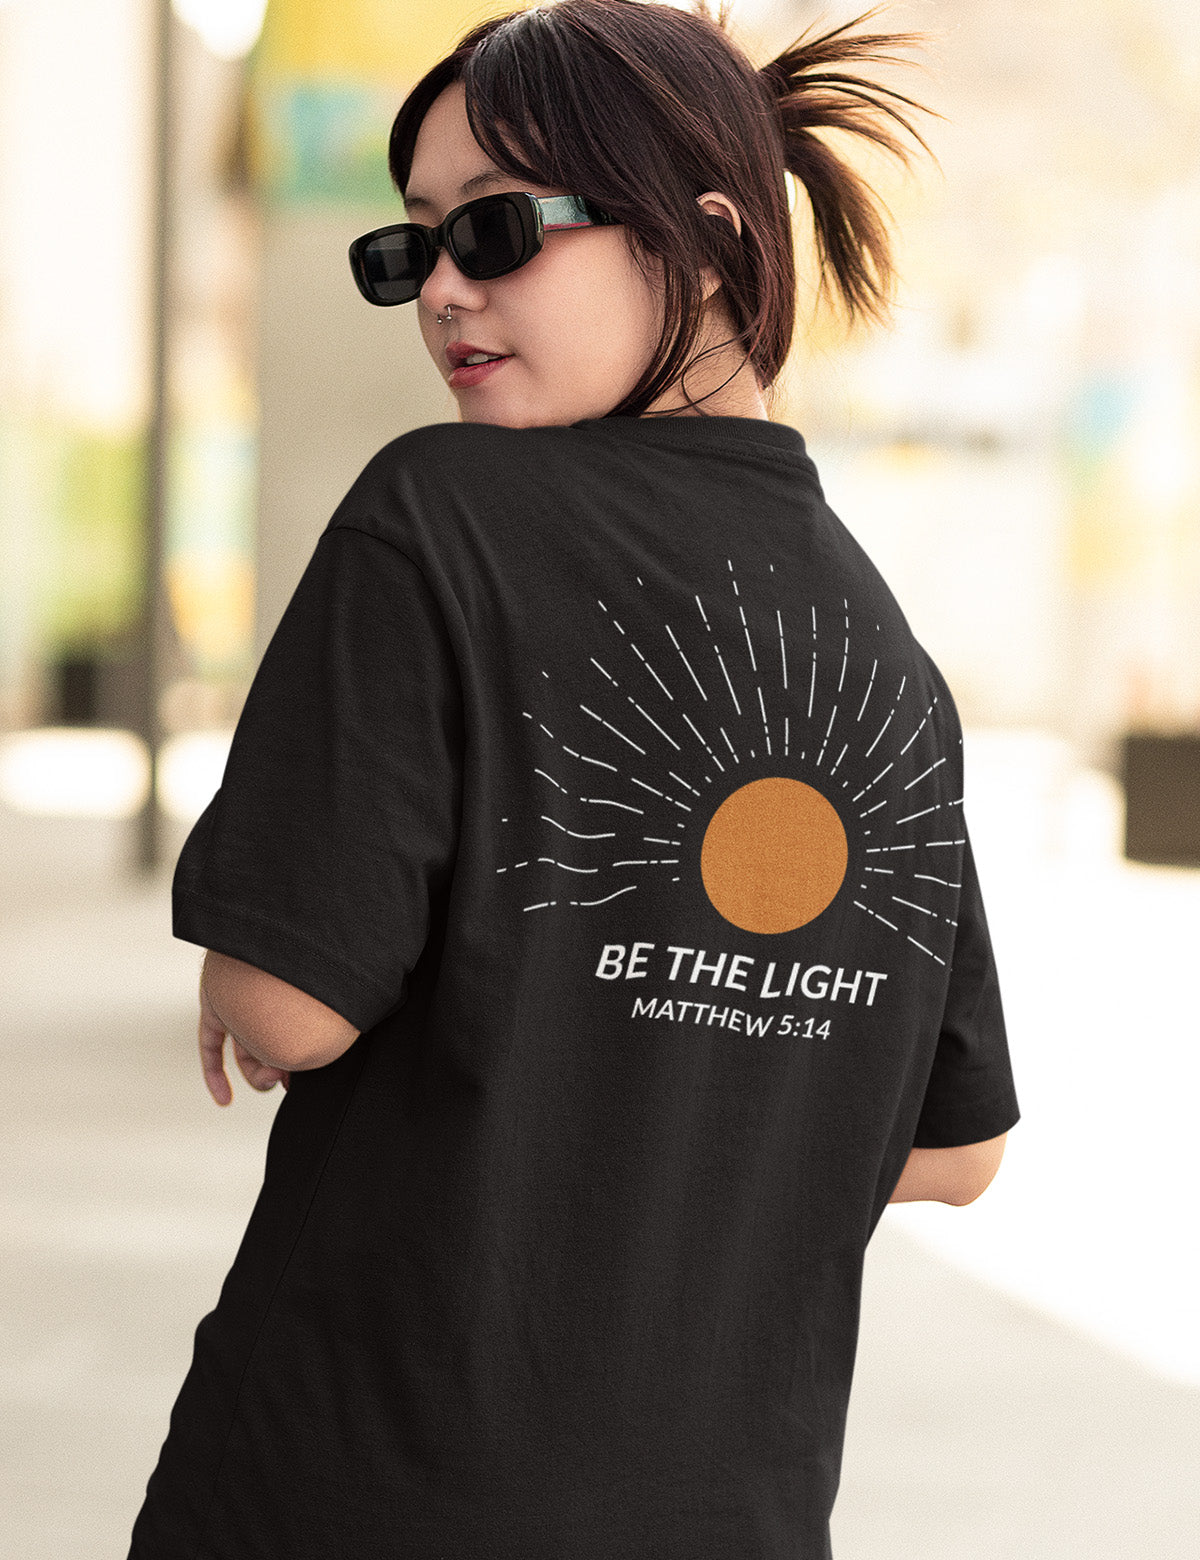 Be The Light Christian Religious shirts for women